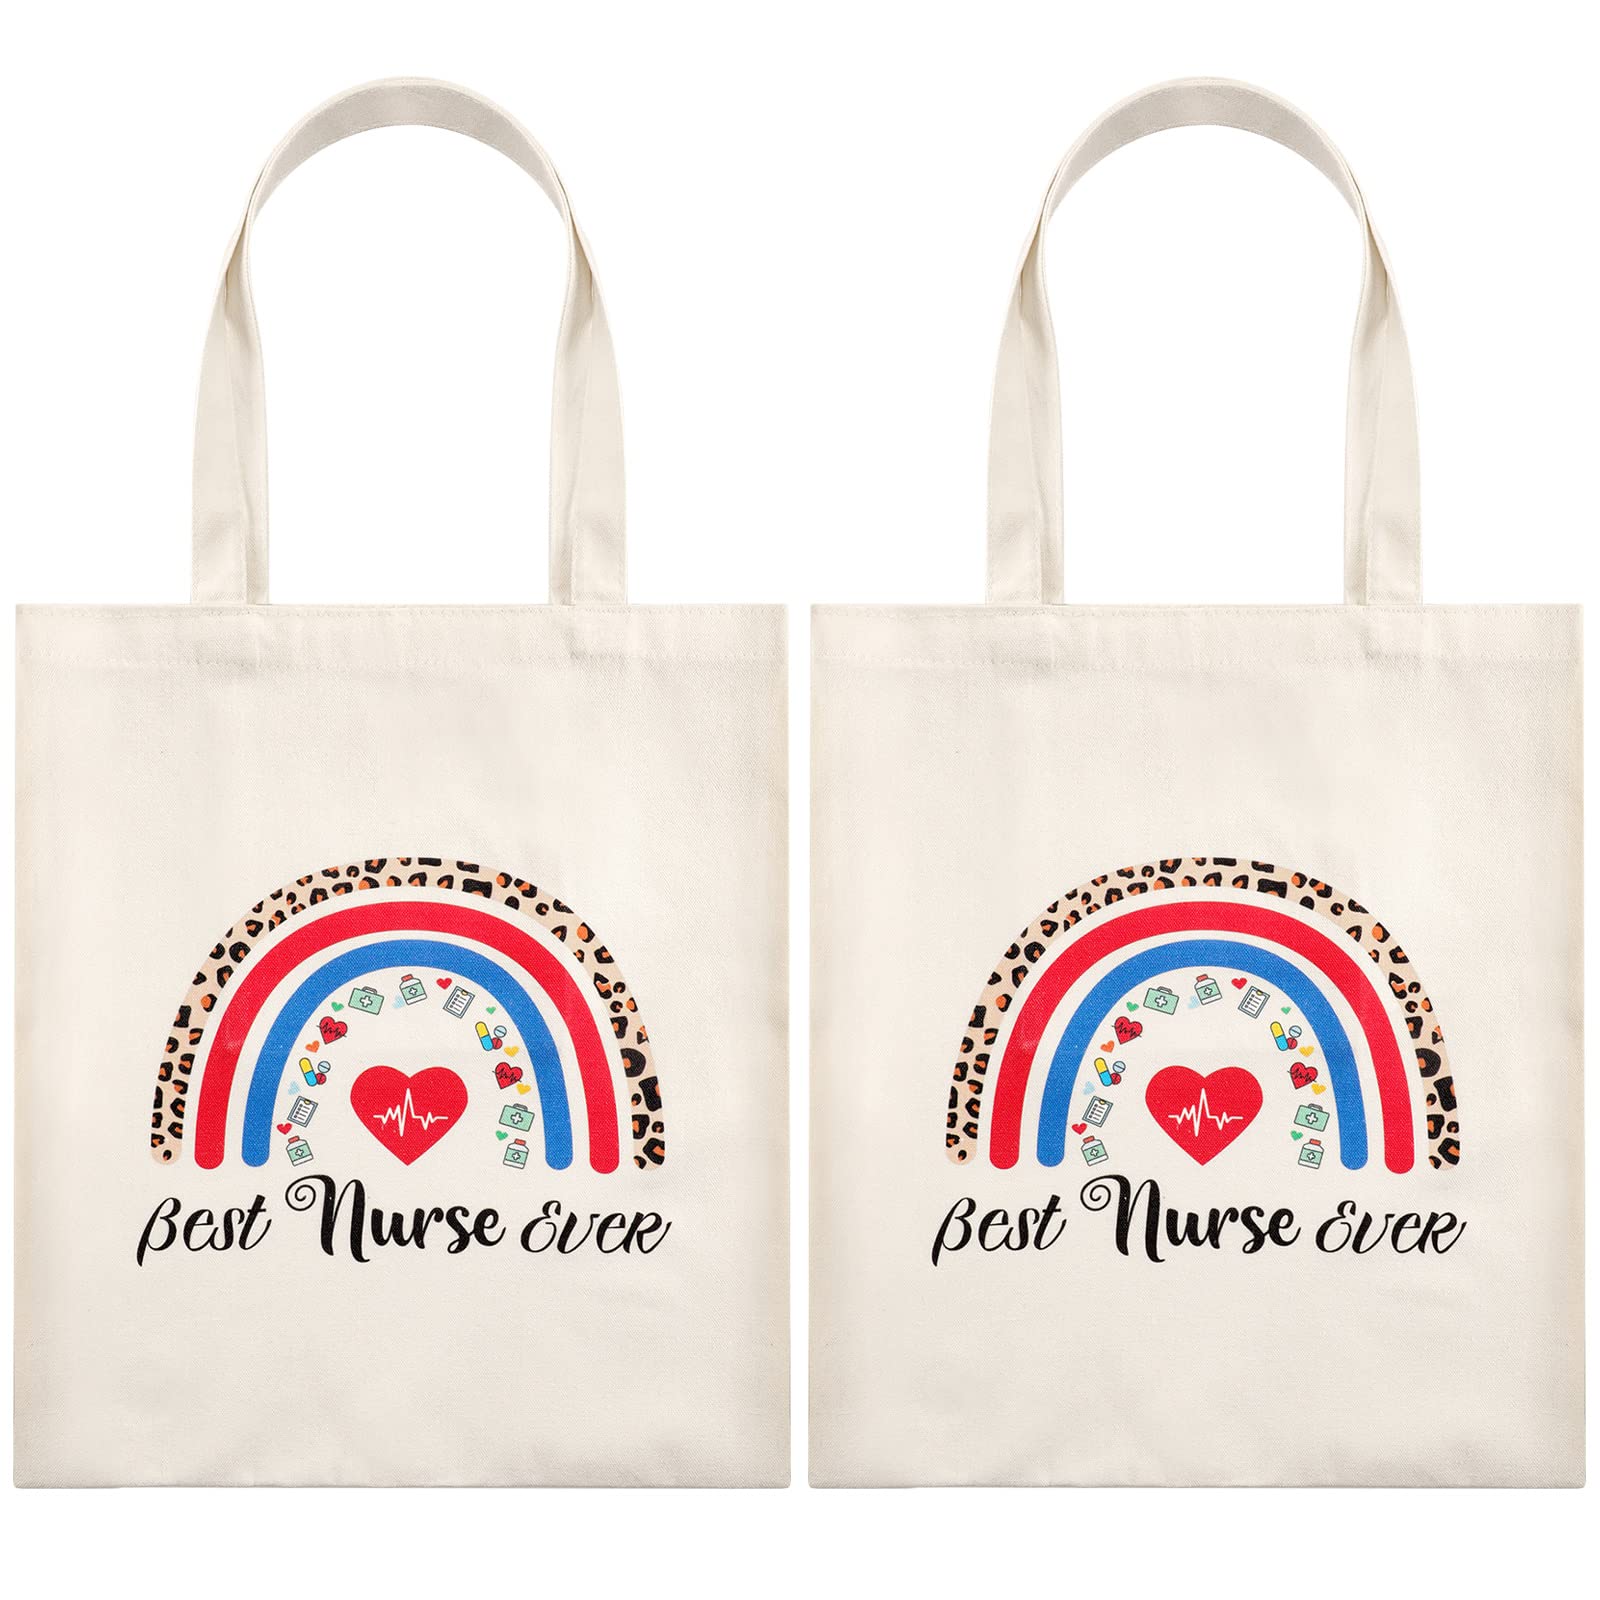 LEIFIDE 2 Pcs Nurse Appreciation Gifts Bags for Women Nurse Canvas Bags, Thank You Nurse Canvas Bag with Pocket for Nurse Coworkers Graduation Party Nurse Appreciation Week Gifts Supplies